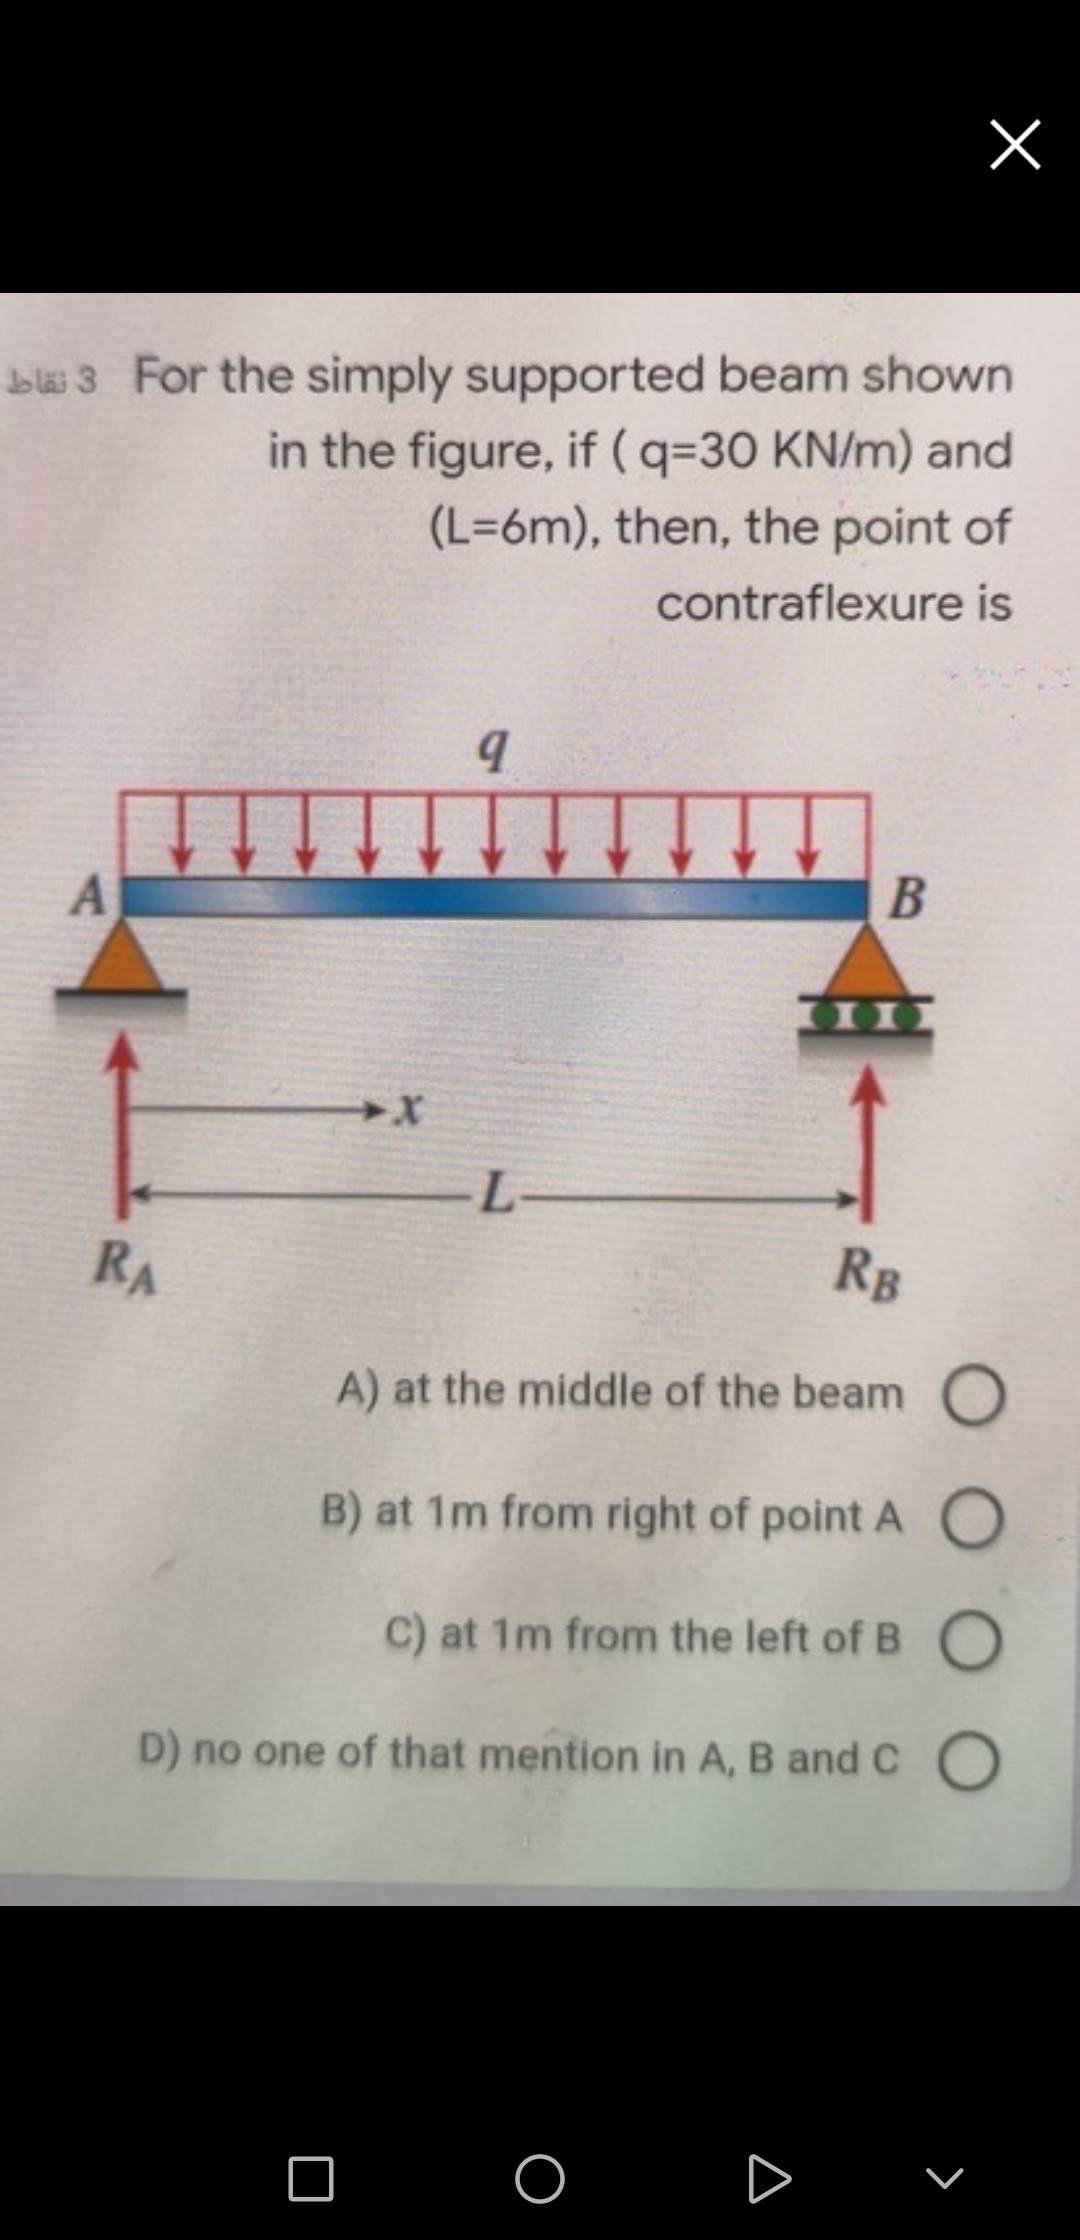 For the simply supported beam shown
in the figure, if (q=30 KN/m) and
(L=6m), then, the point of
contraflexure is
